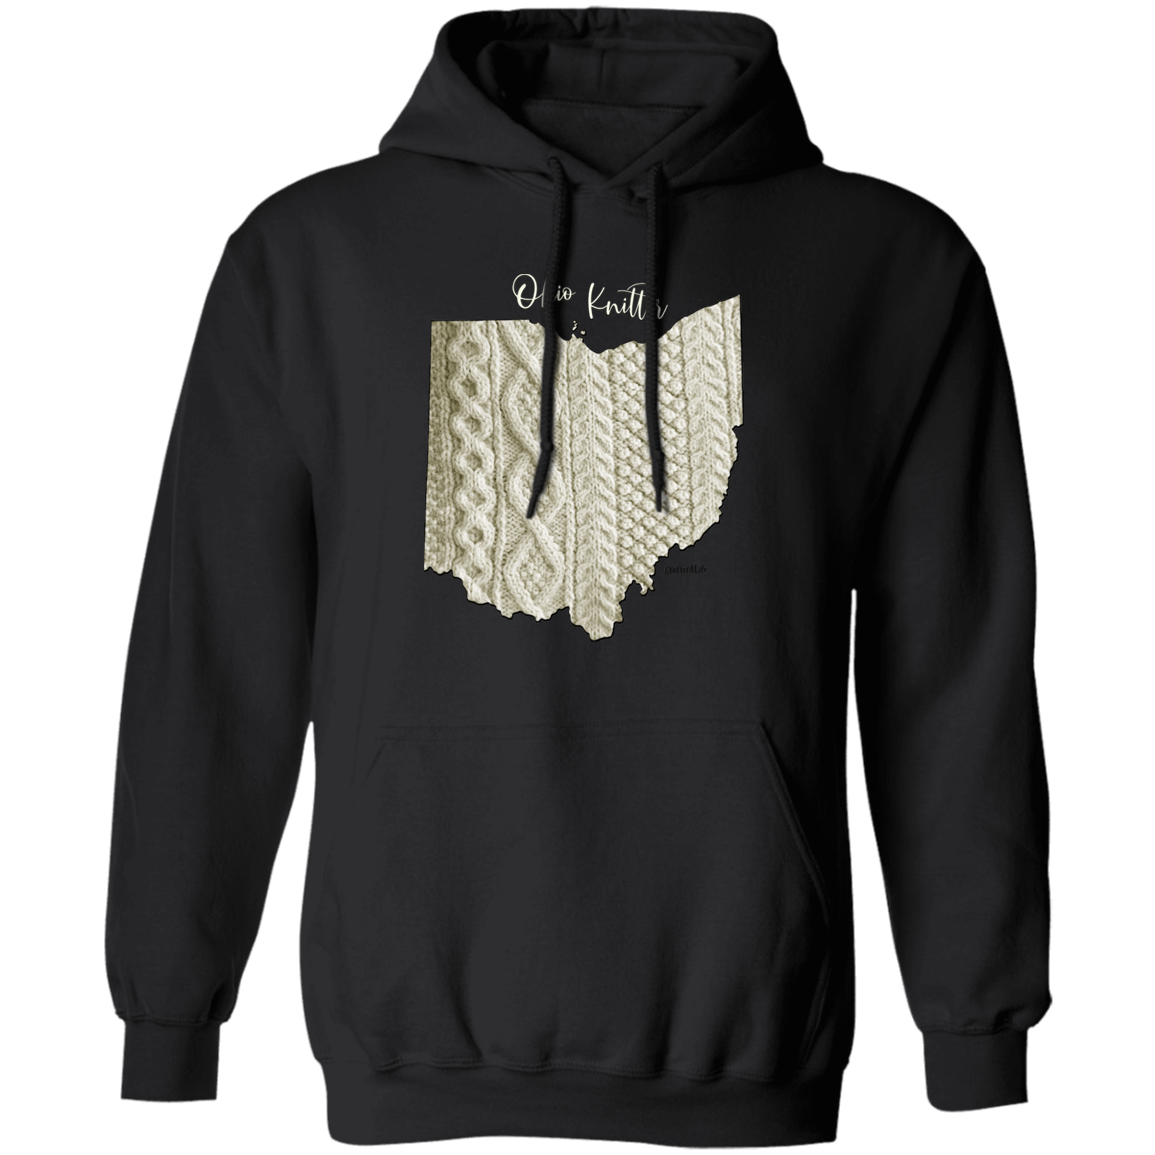 Ohio Knitter Pullover Hoodie